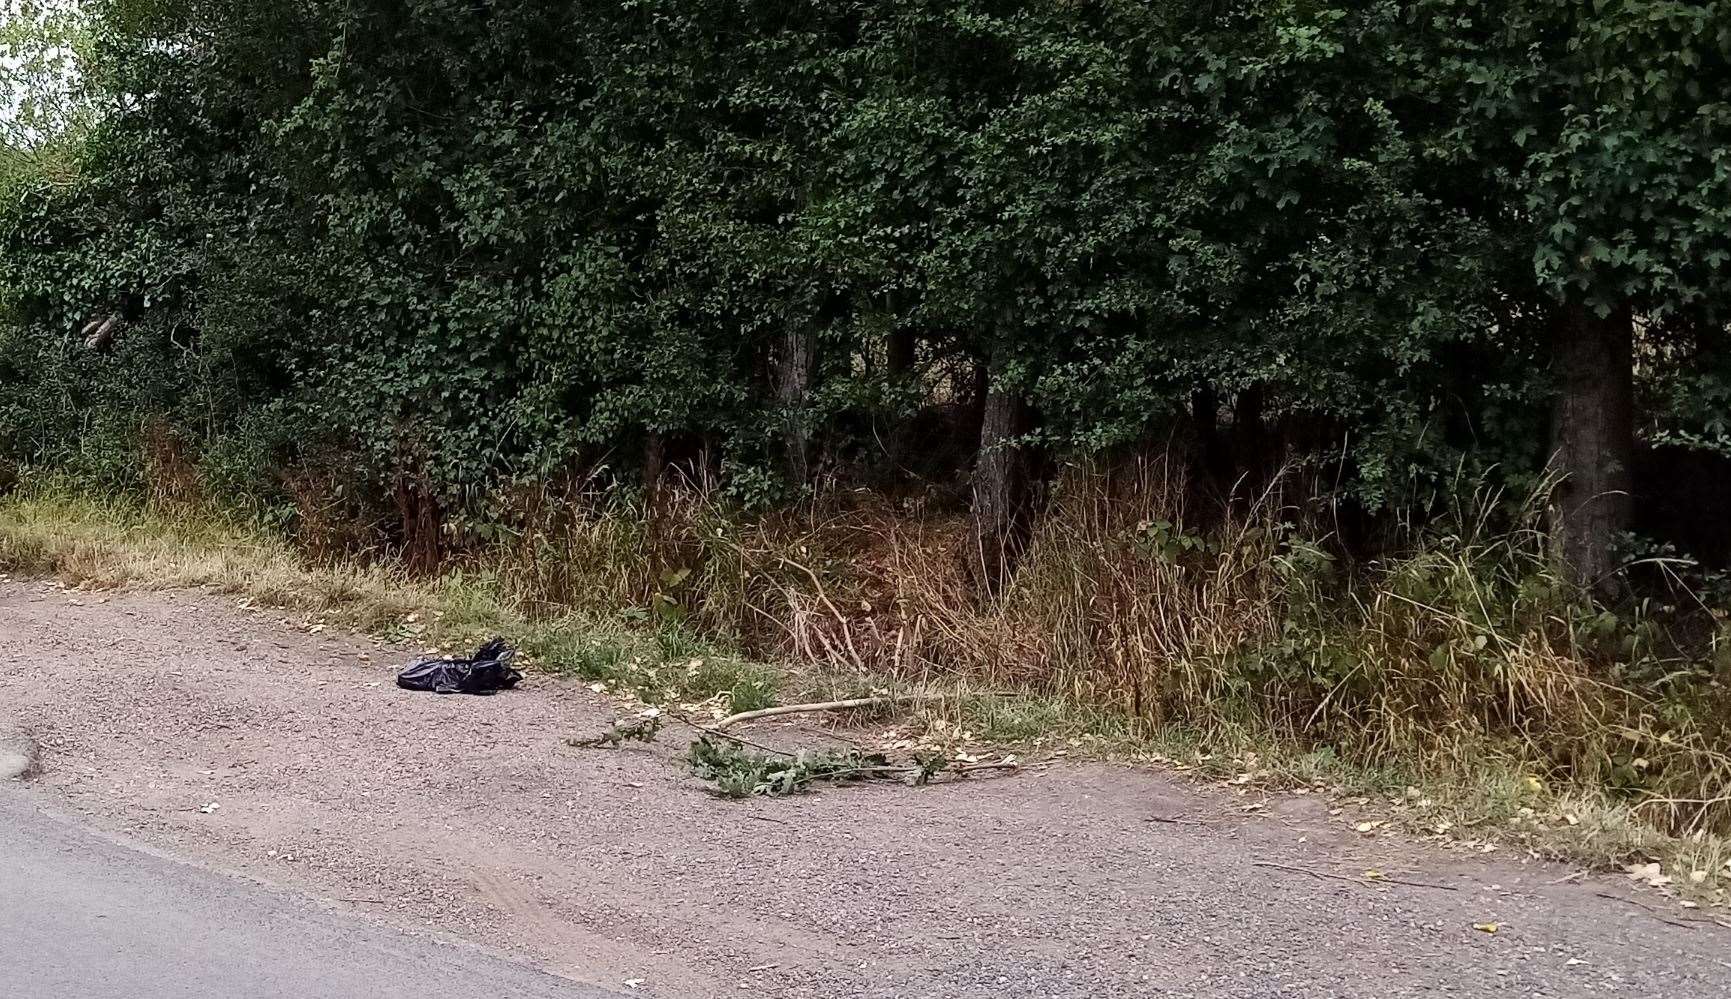 A dead dog was found wrapped in a plastic bag in Plain Road, Marden